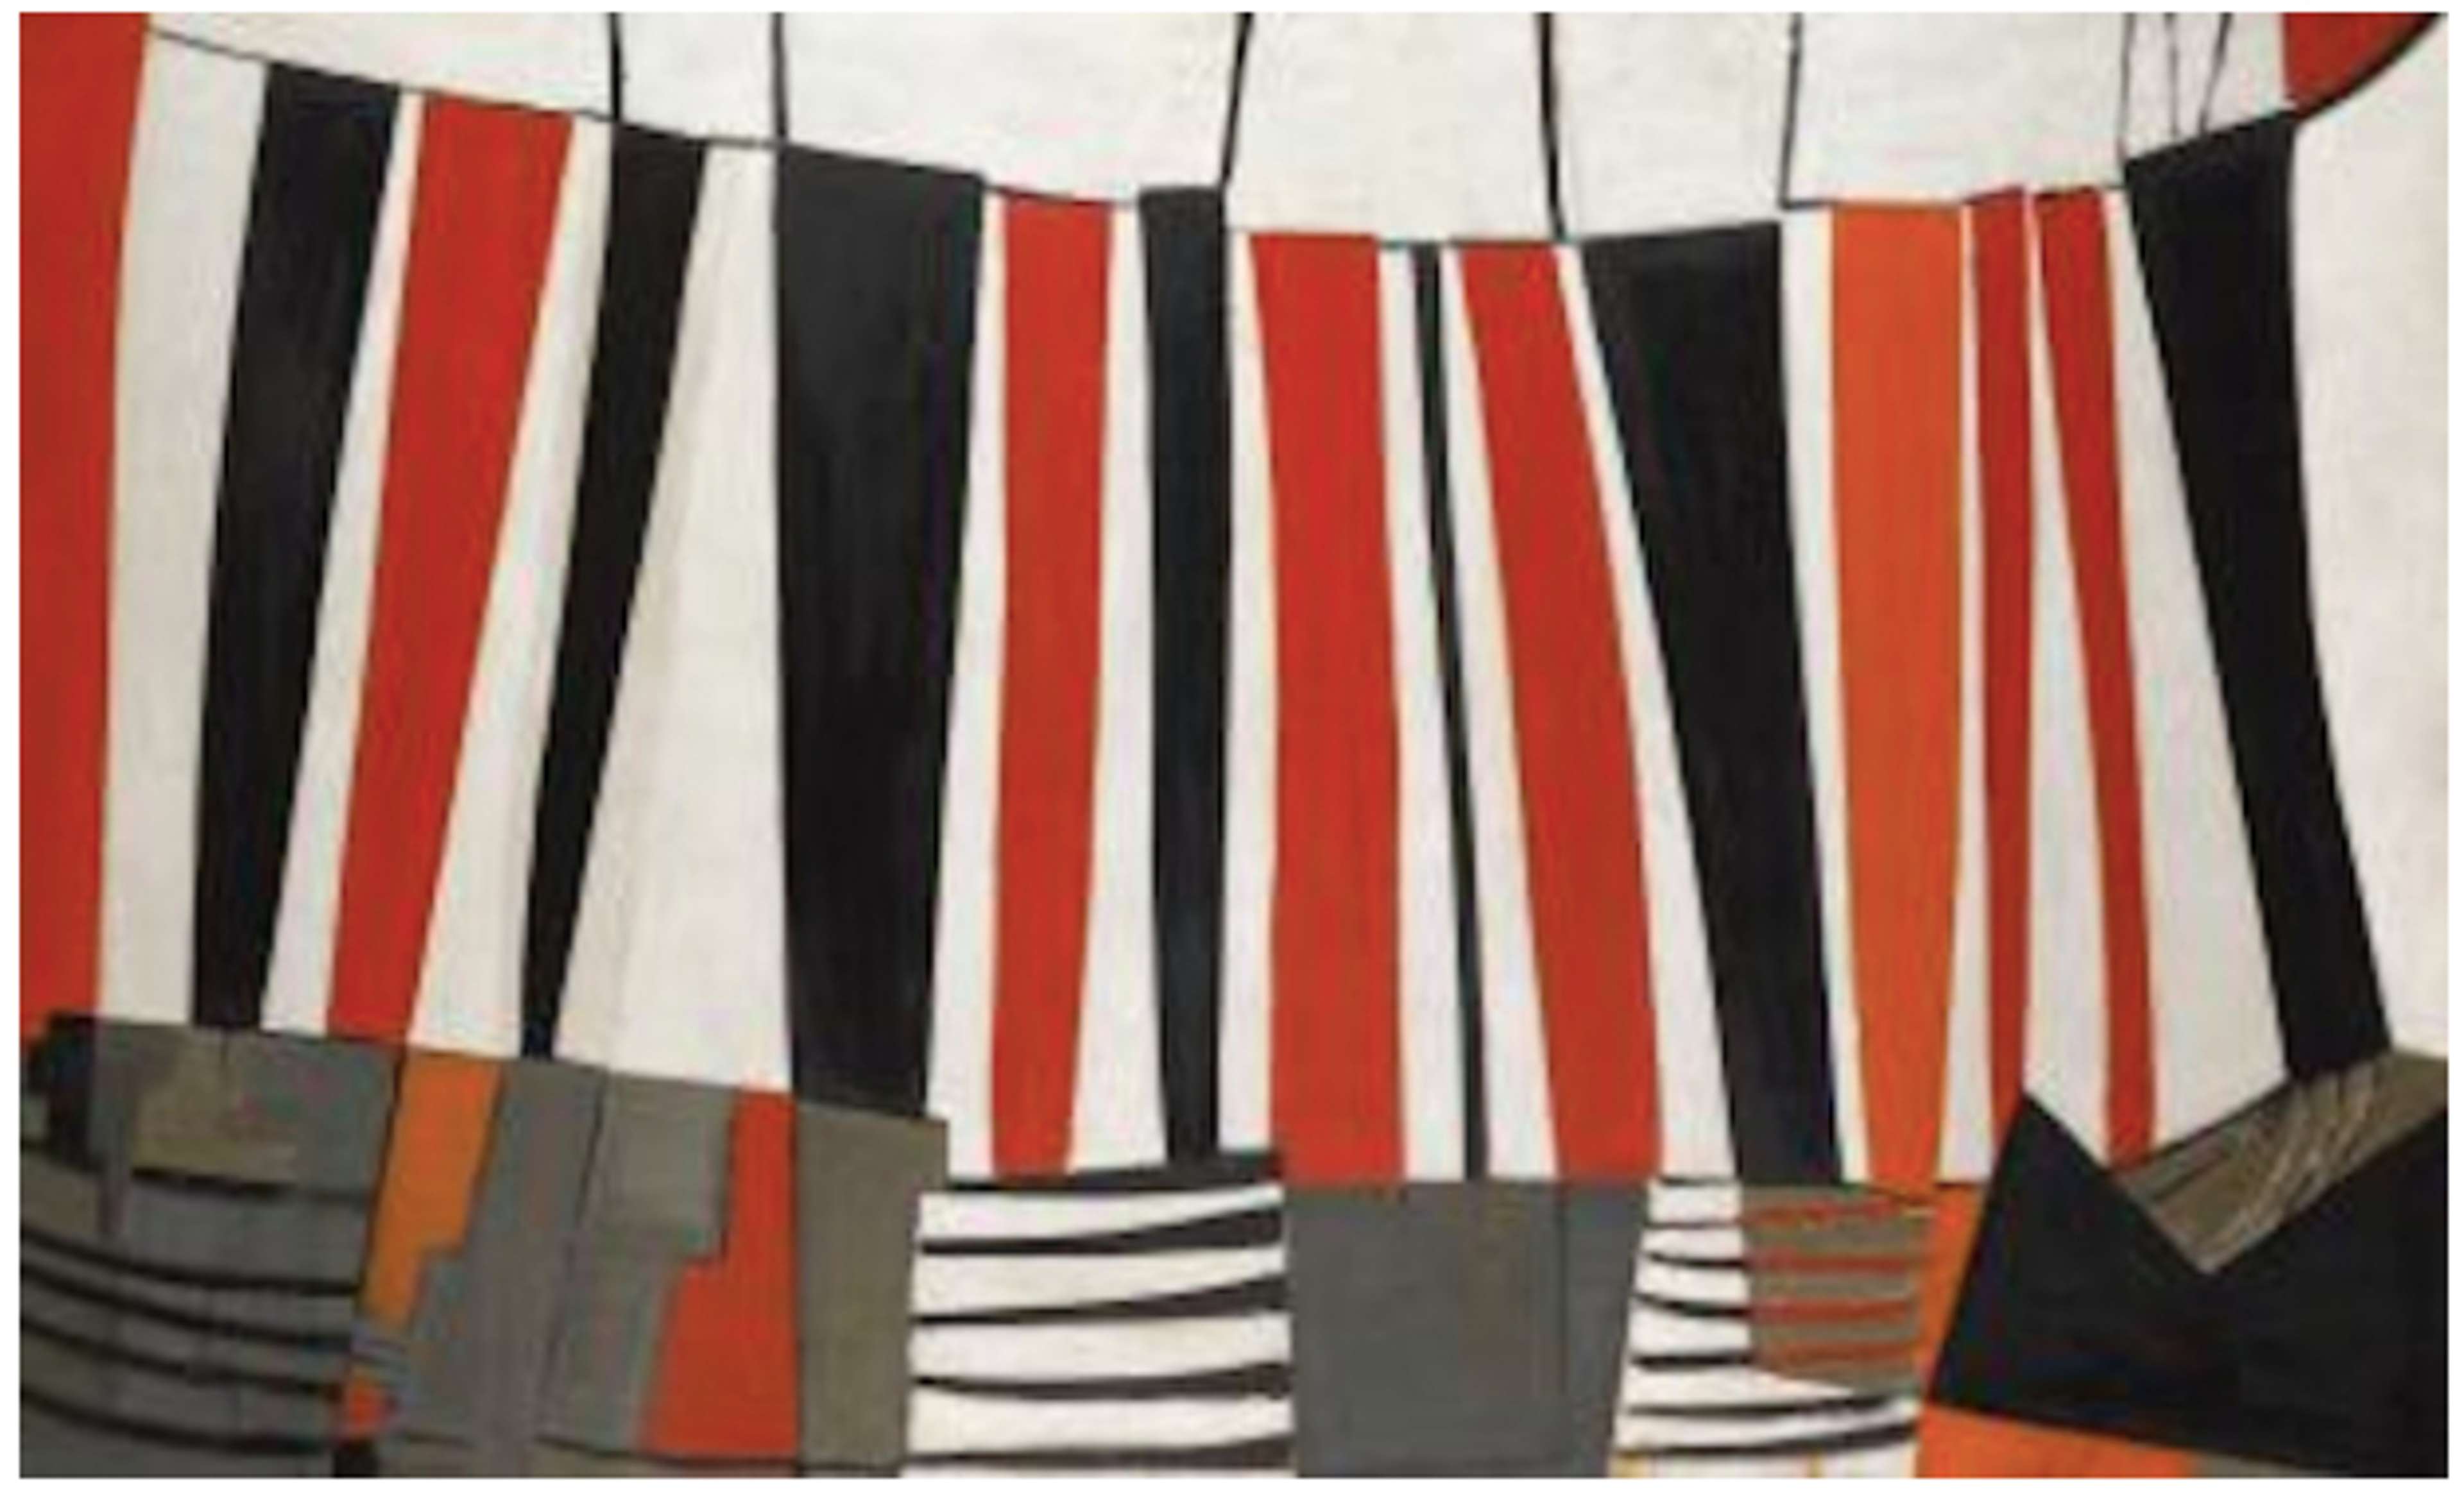 An abstract painting consisting of vertical lines in red, white, and black. The composition is divided by three horizontal sections. The top section features white with thin black lines resembling teeth, while the bottom section is a mix of abstracted vertical and horizontal lines in shades of grey, orange, and red.